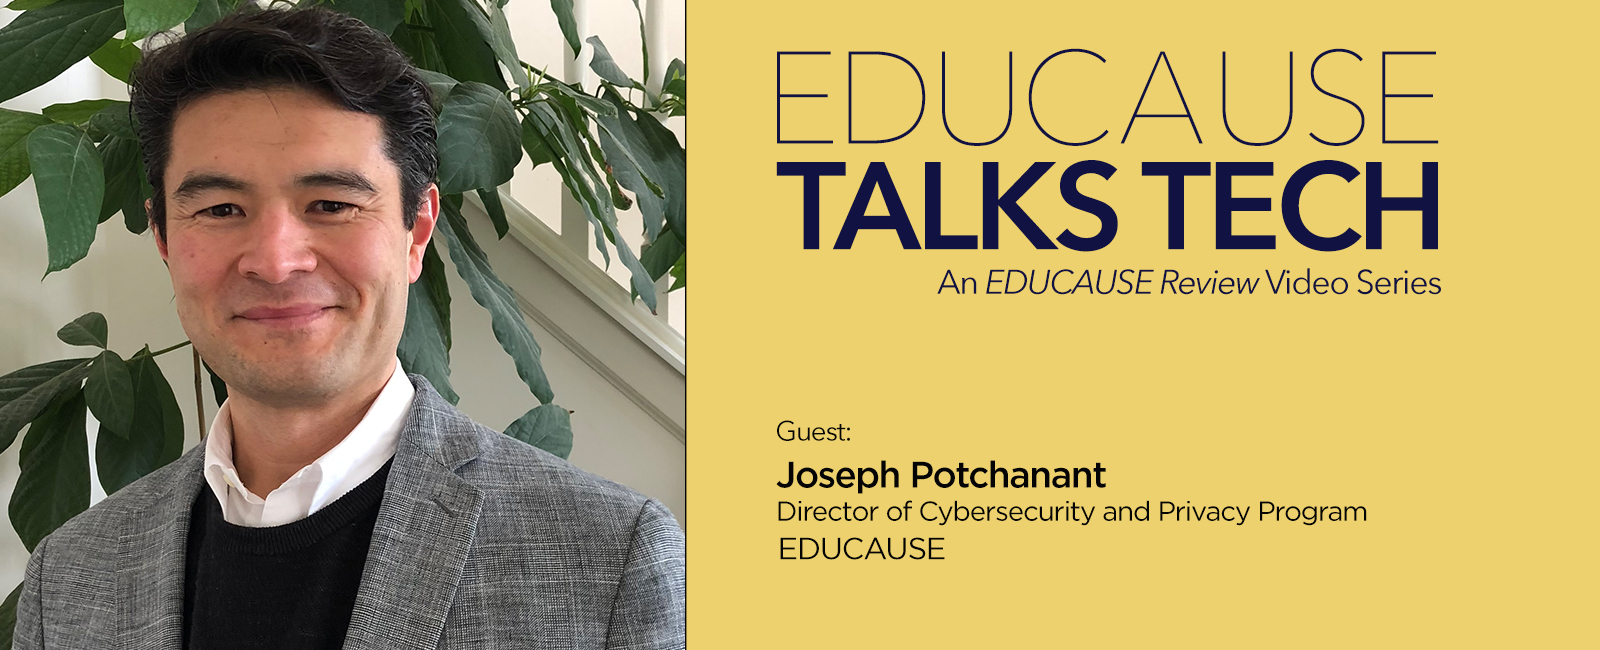 Introducing Joe Potchanant, the new Director of the EDUCAUSE Cybersecurity and Privacy Program